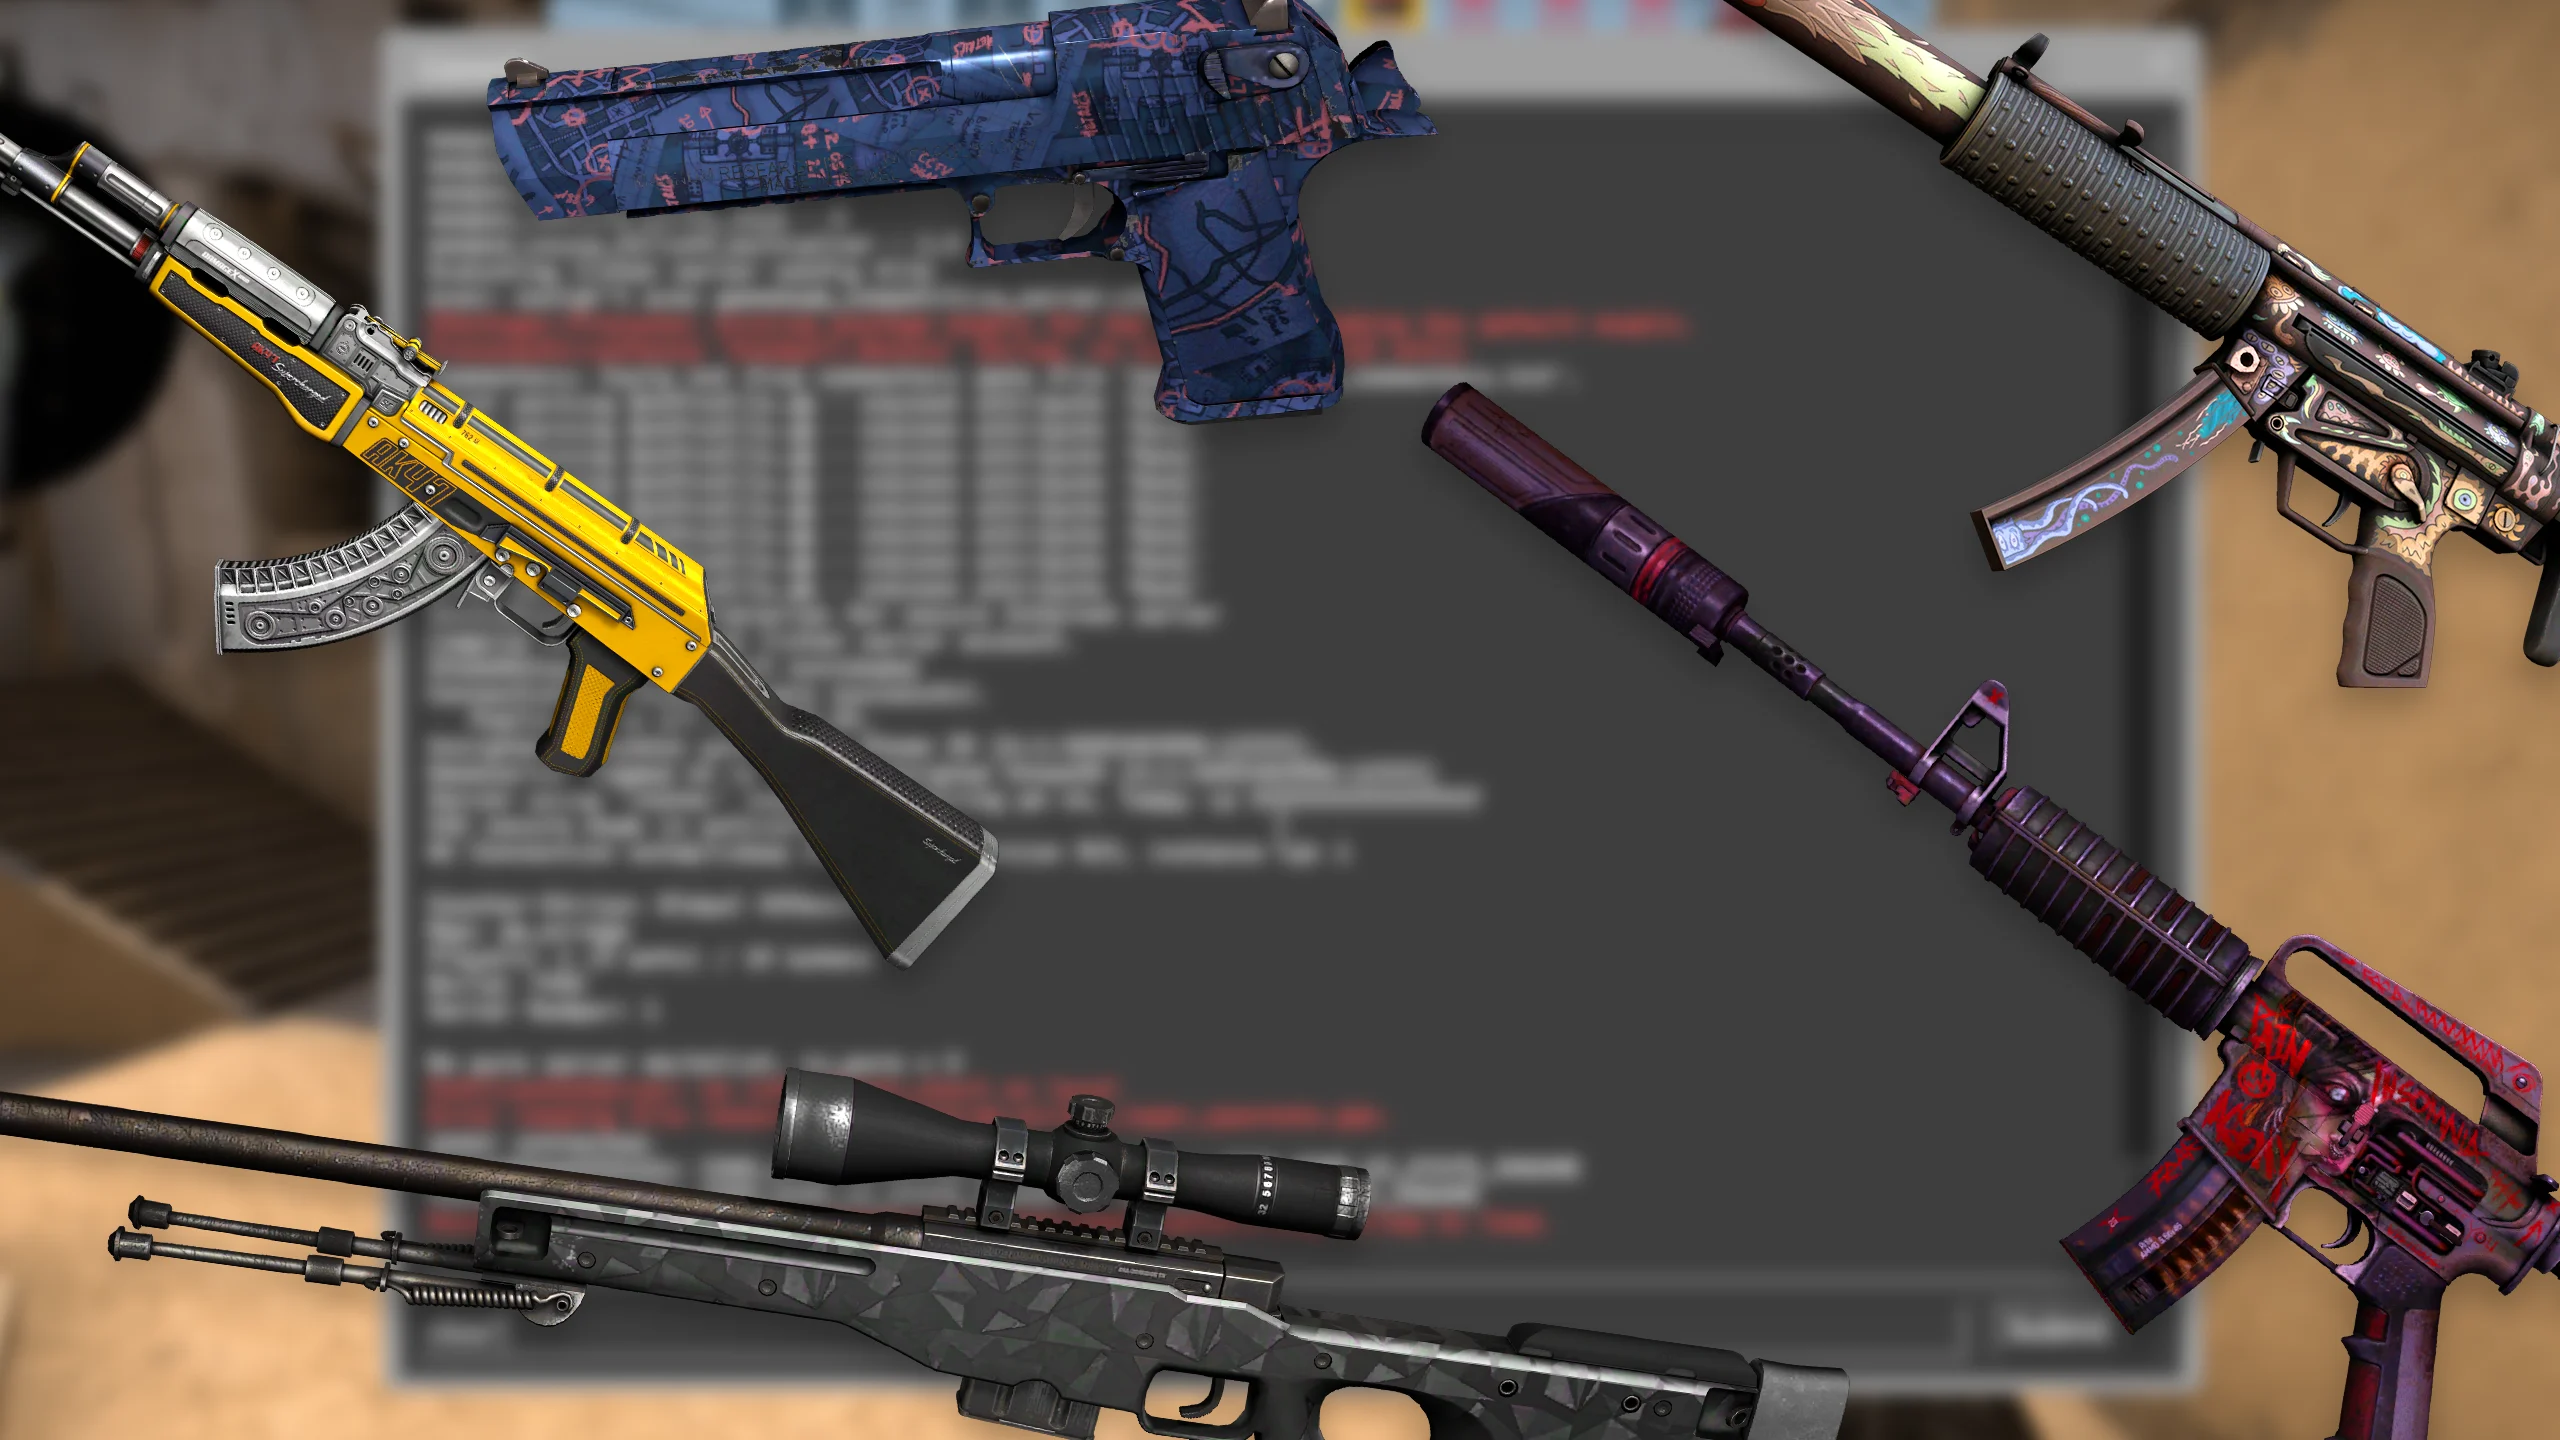 All CS:GO Give Weapon Commands